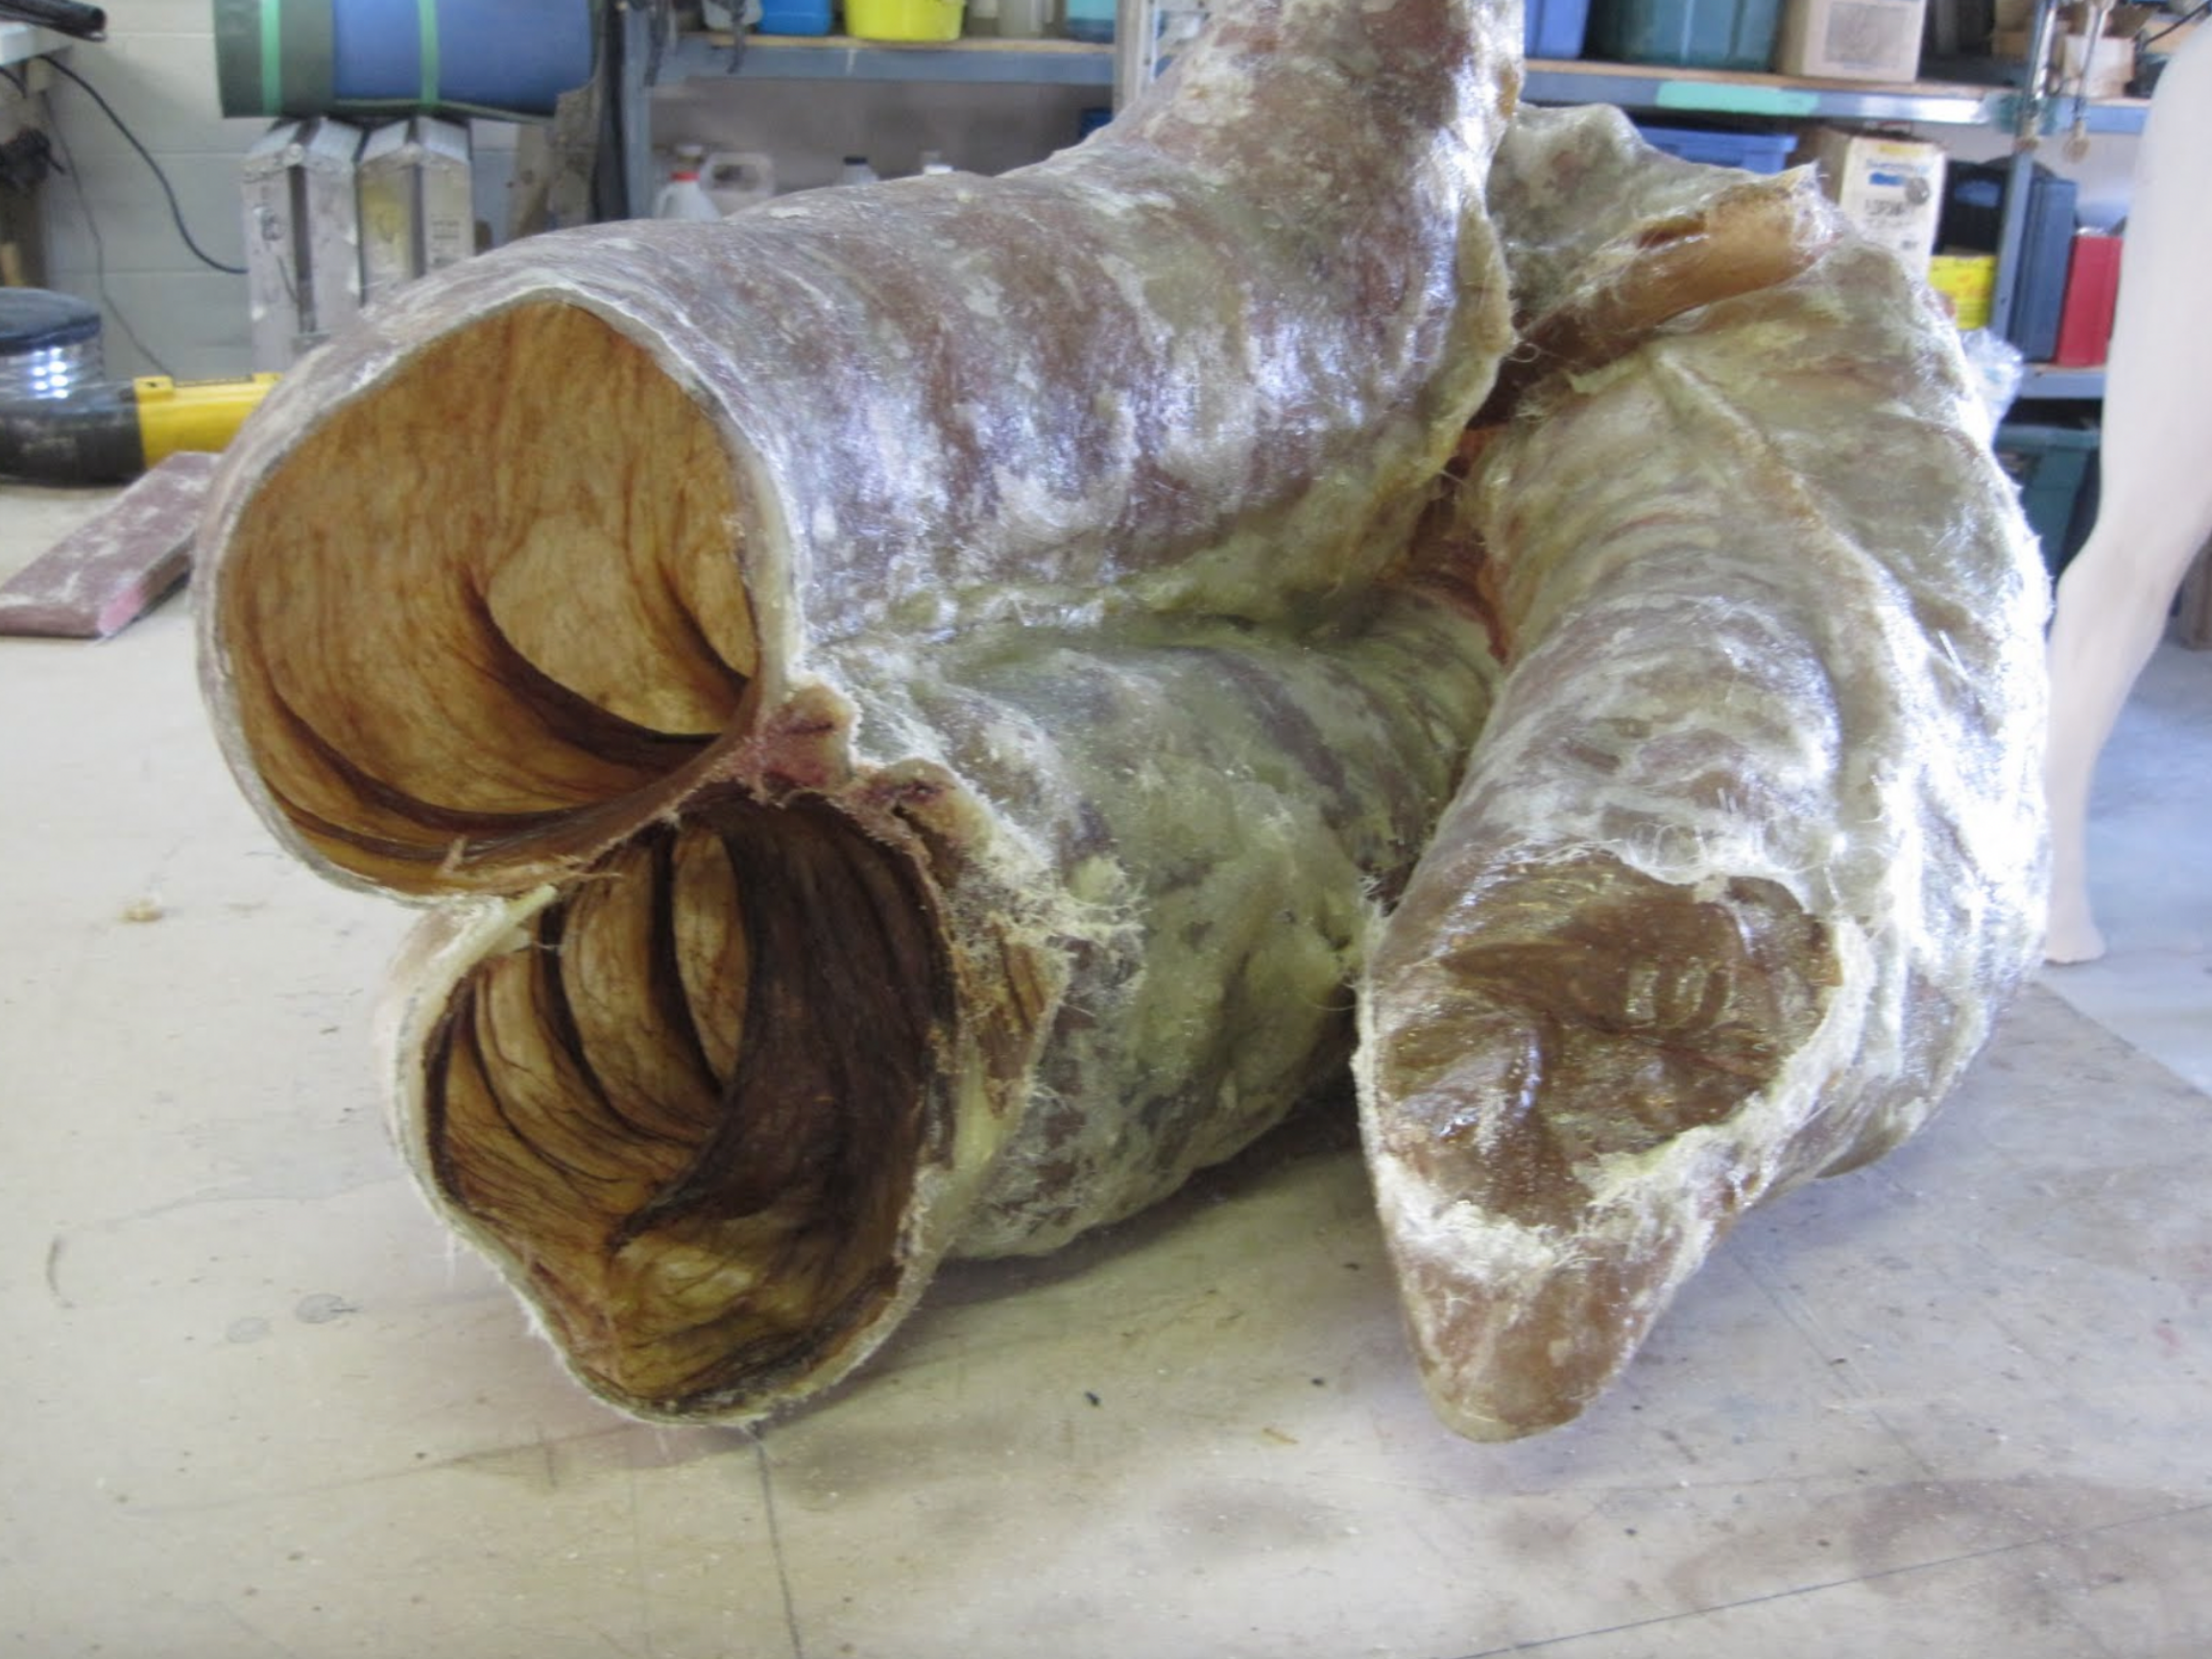 The other portion of the equine large intestine, including the secum. The intestine has been somewhat preserved with resin. It has been separated to facilitate the molding process.